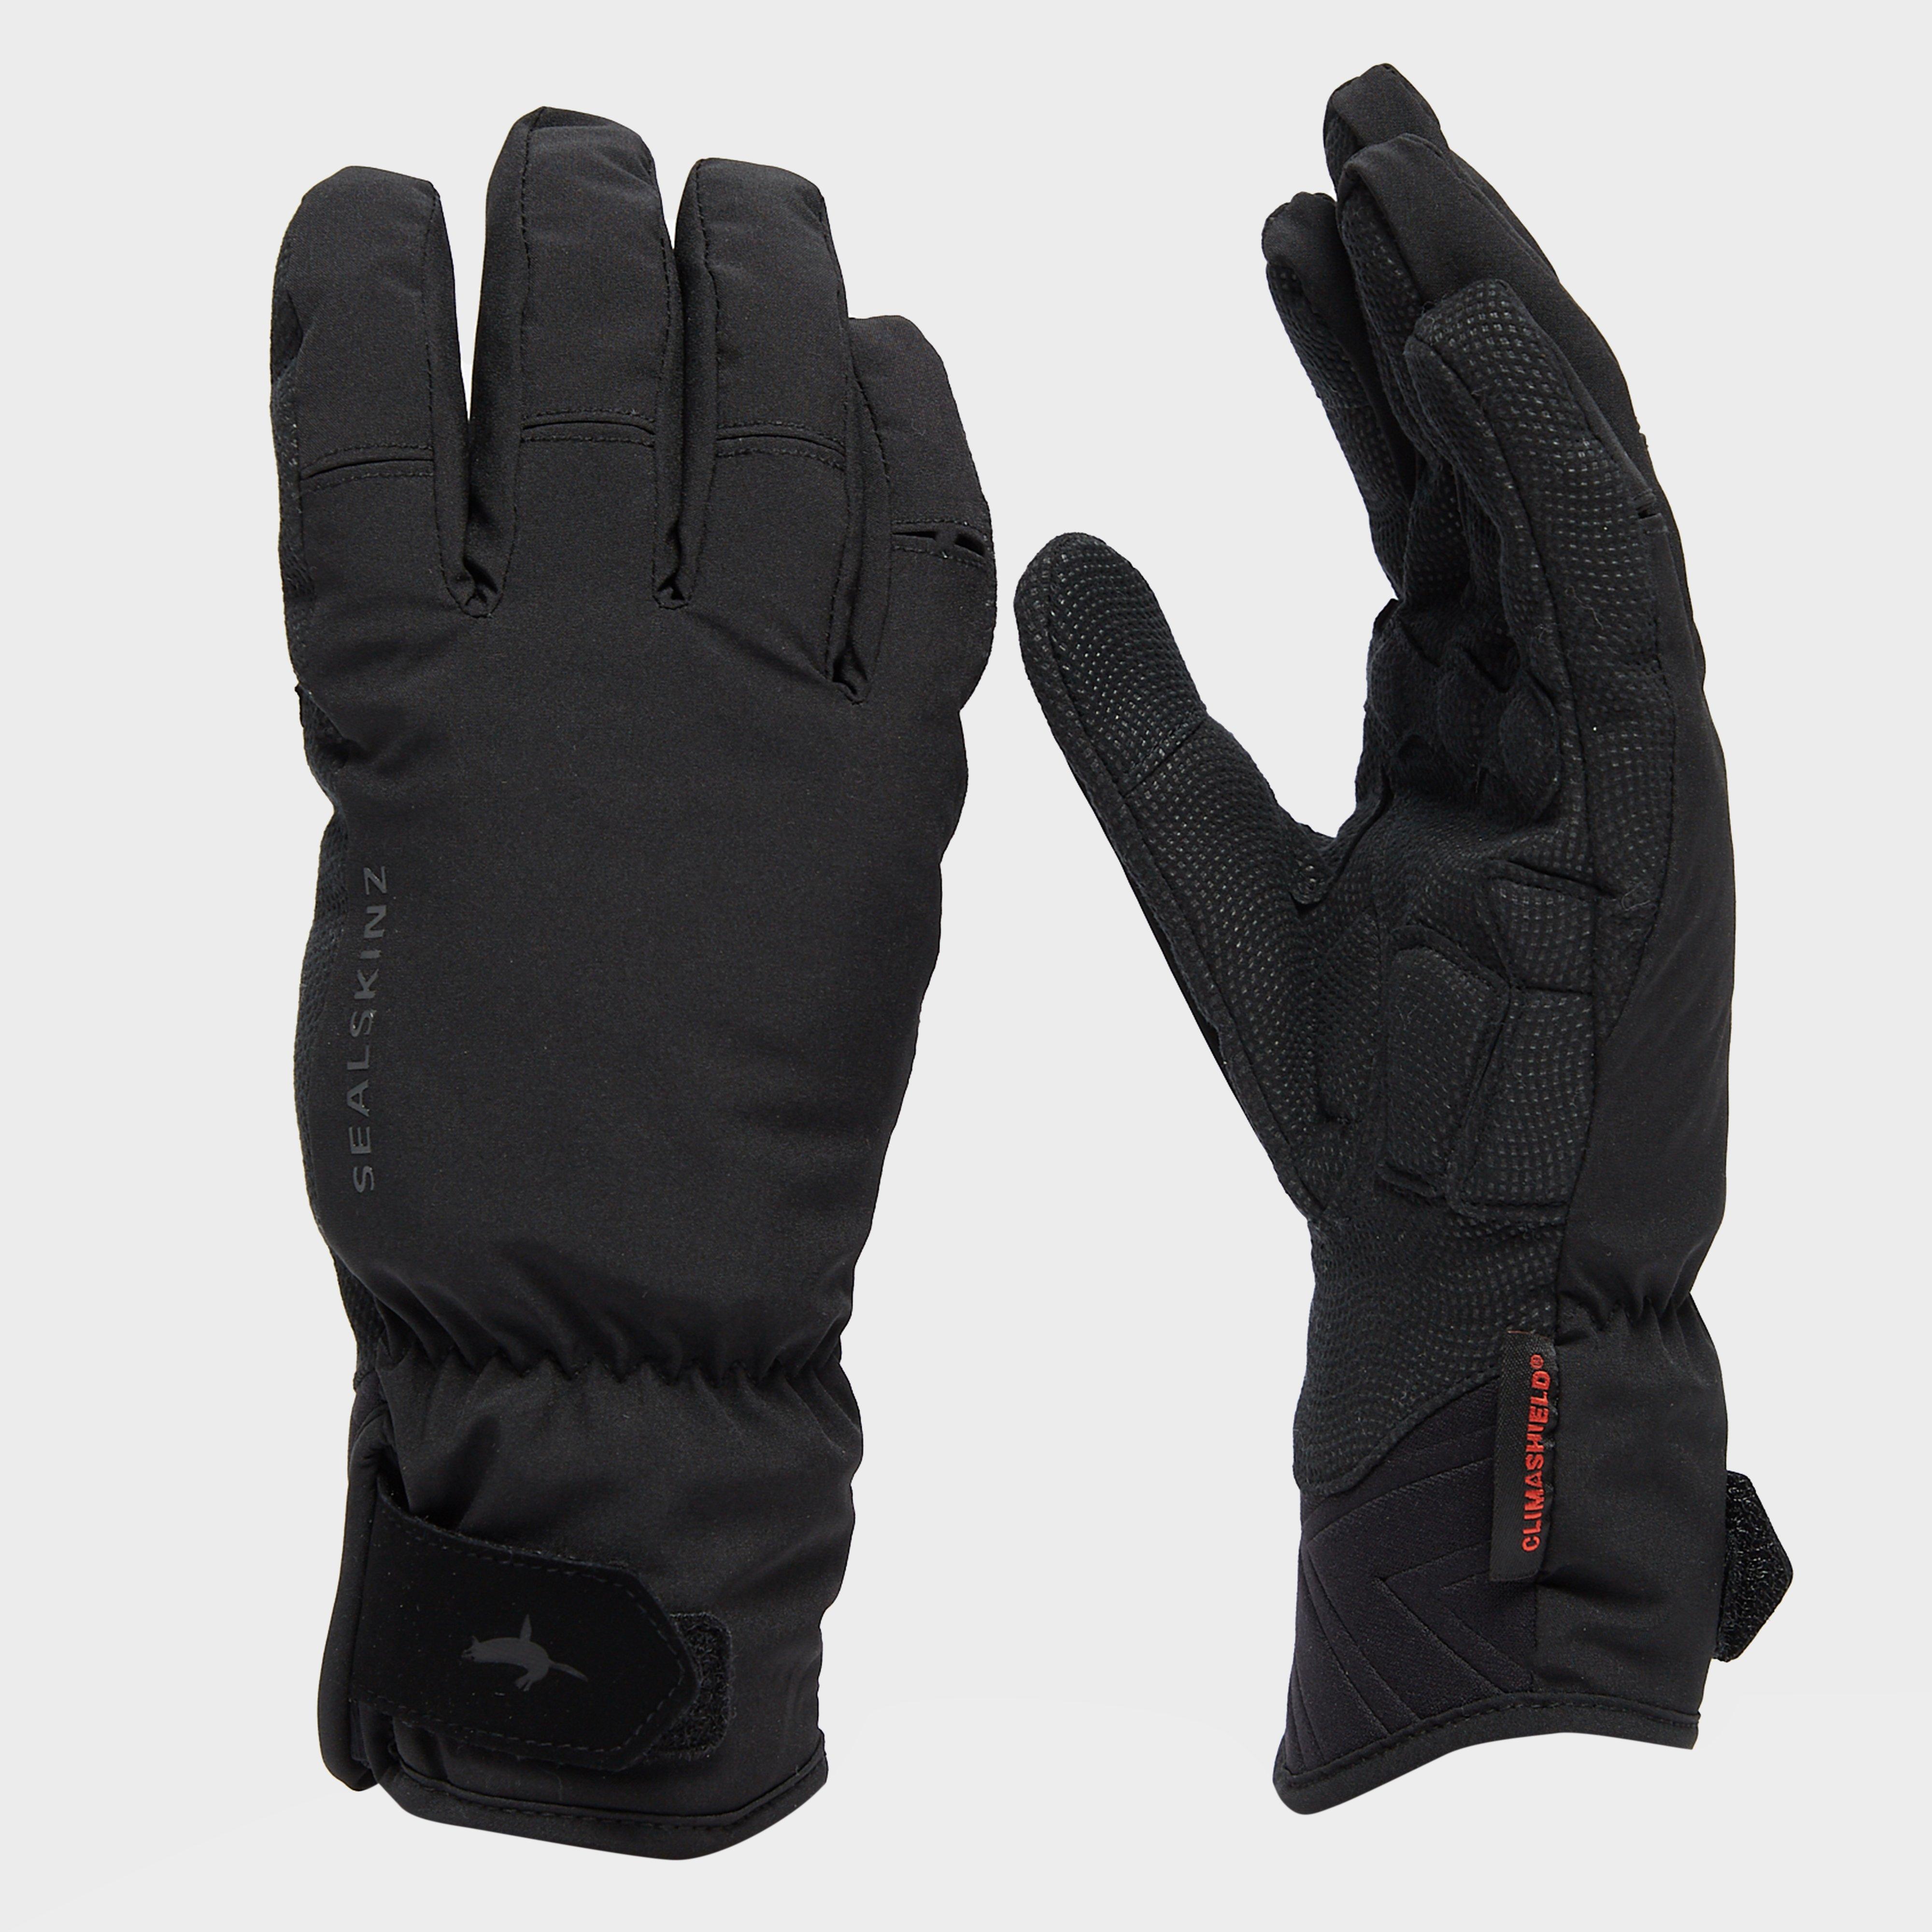 Photos - Cycling Gloves Waterproof Extreme Cold Gloves - Black, Black 